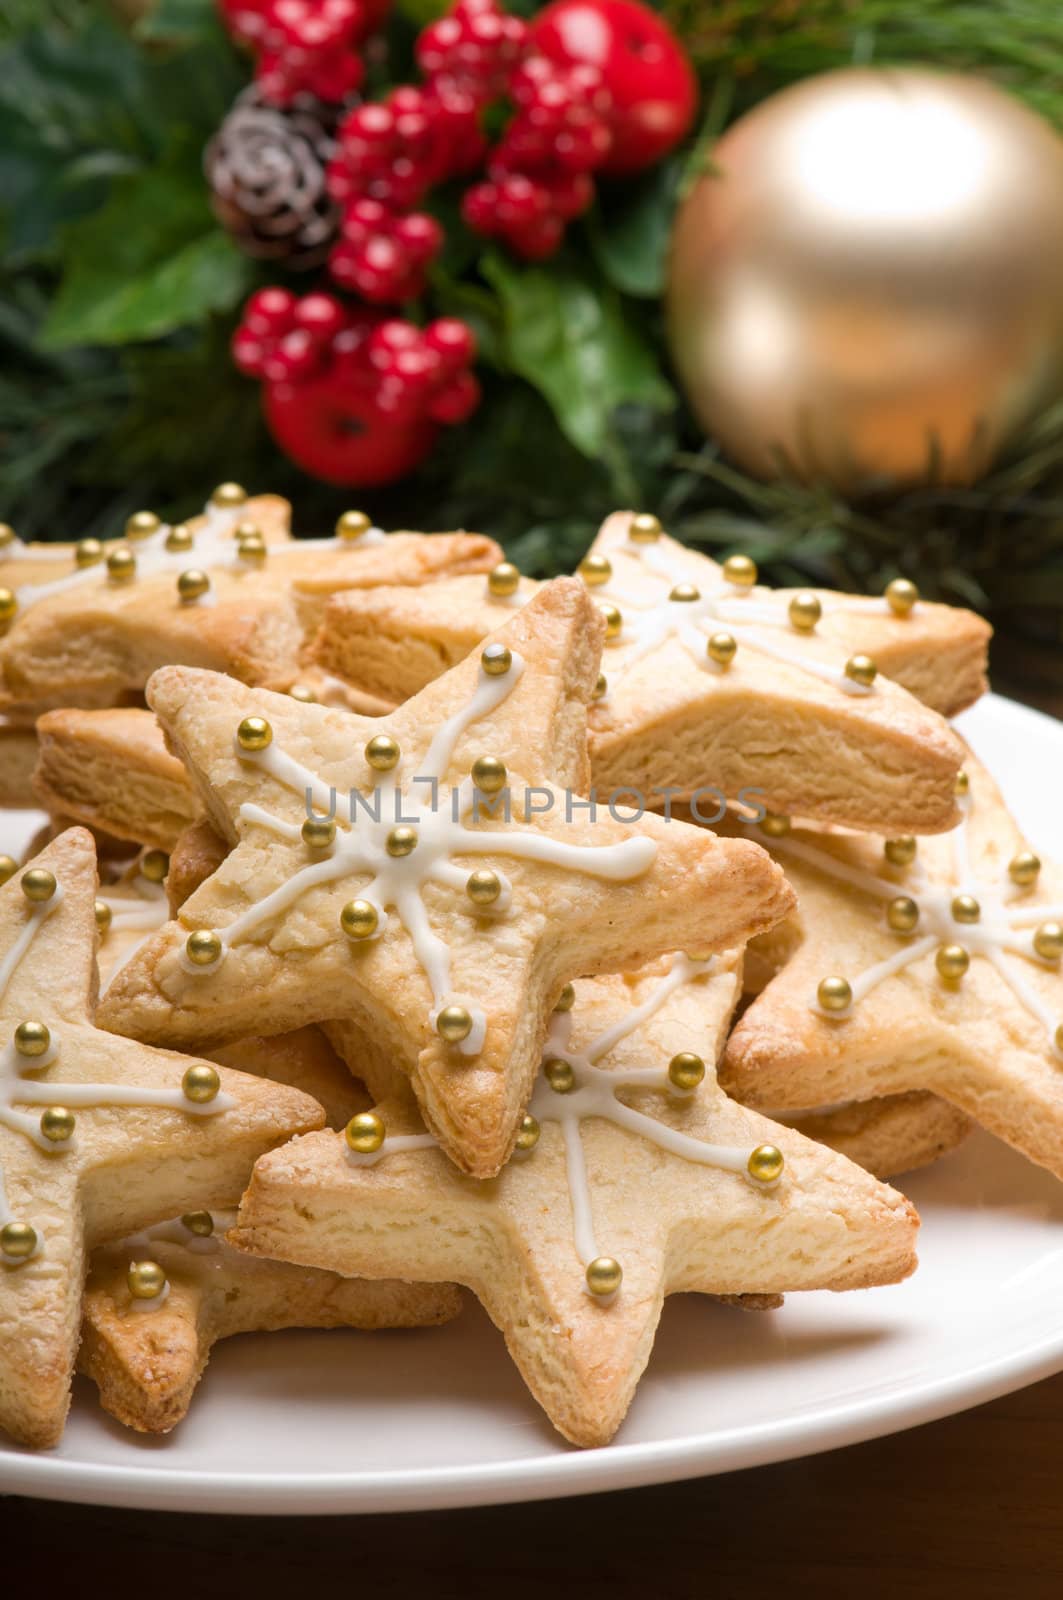 Decorated cookies in festive setting with green decoration